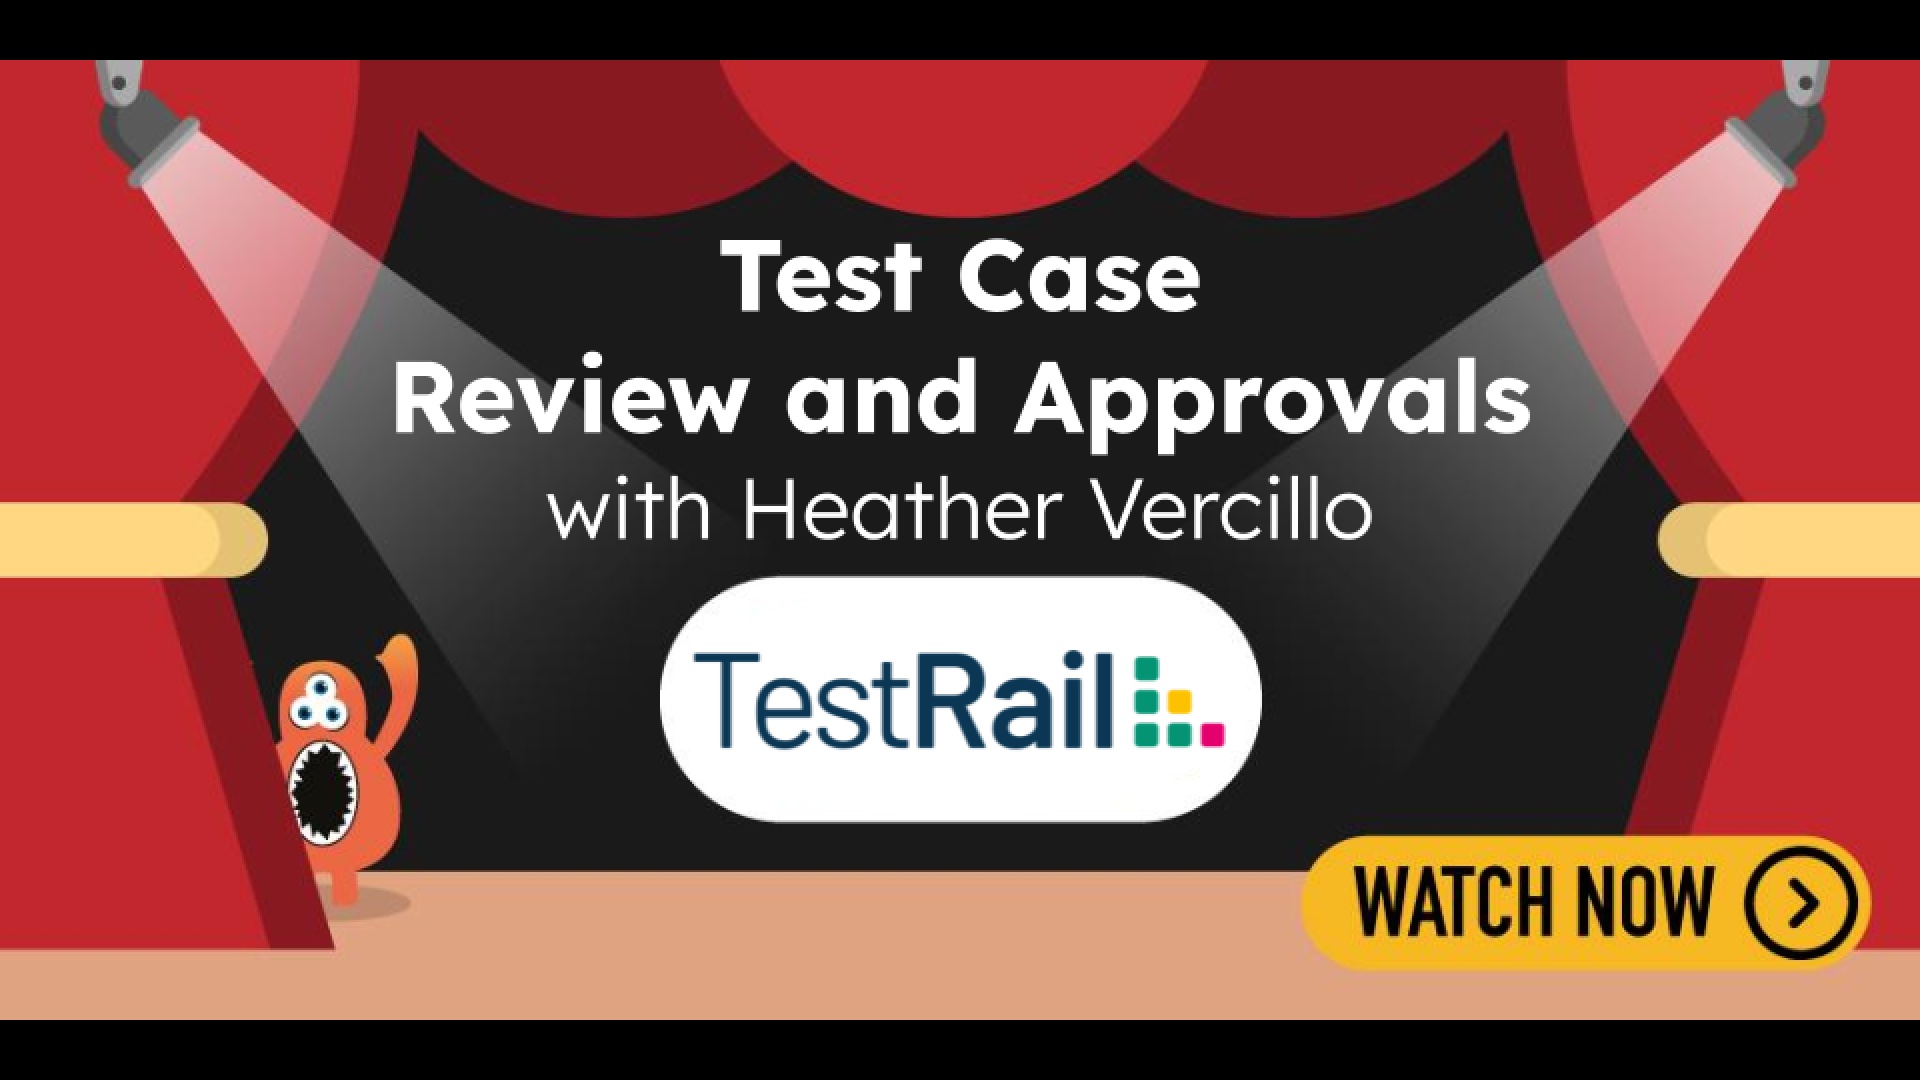 Test Case Review and Approvals with Heather Vercillo